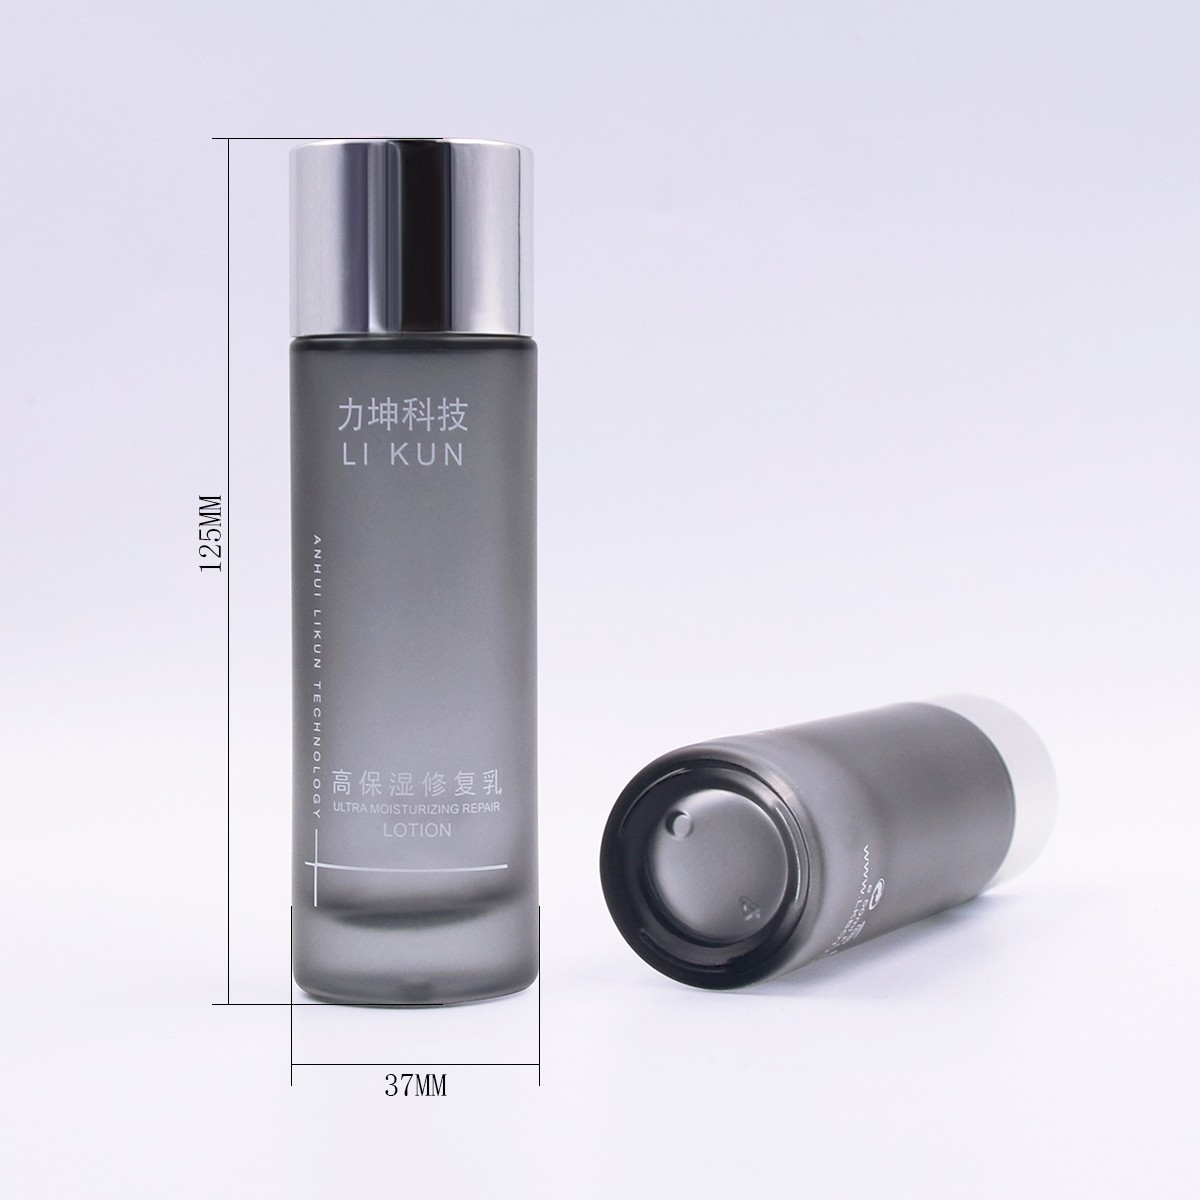 50ml rounded shoulders glass lotion bottle